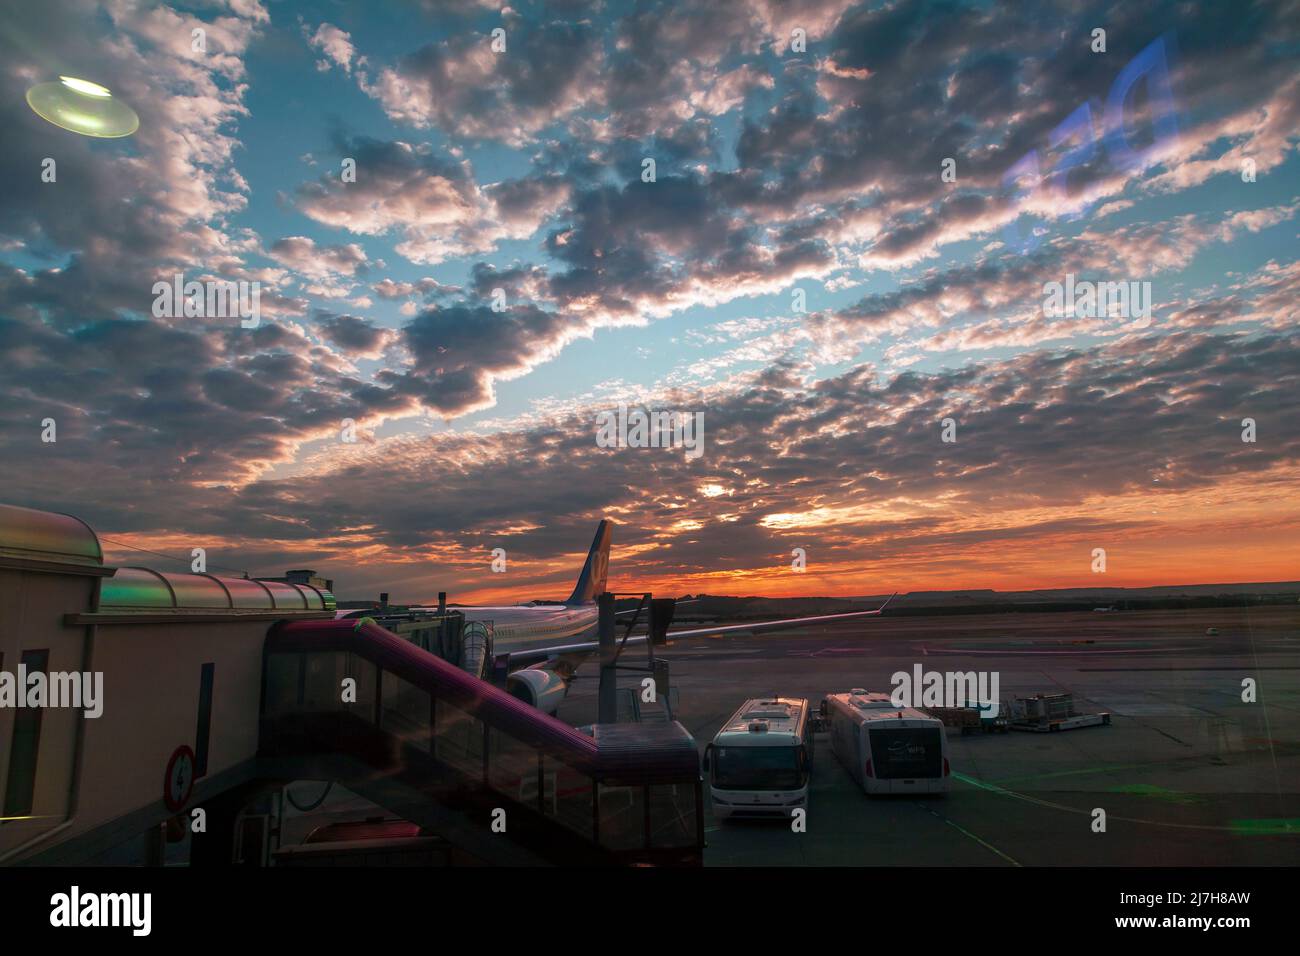 Amazing sunrise with cloudscape in Madrid, at Barajas airport. Madrid is famous for its cloudscapes and this view from the waiting area confirms this. Stock Photo